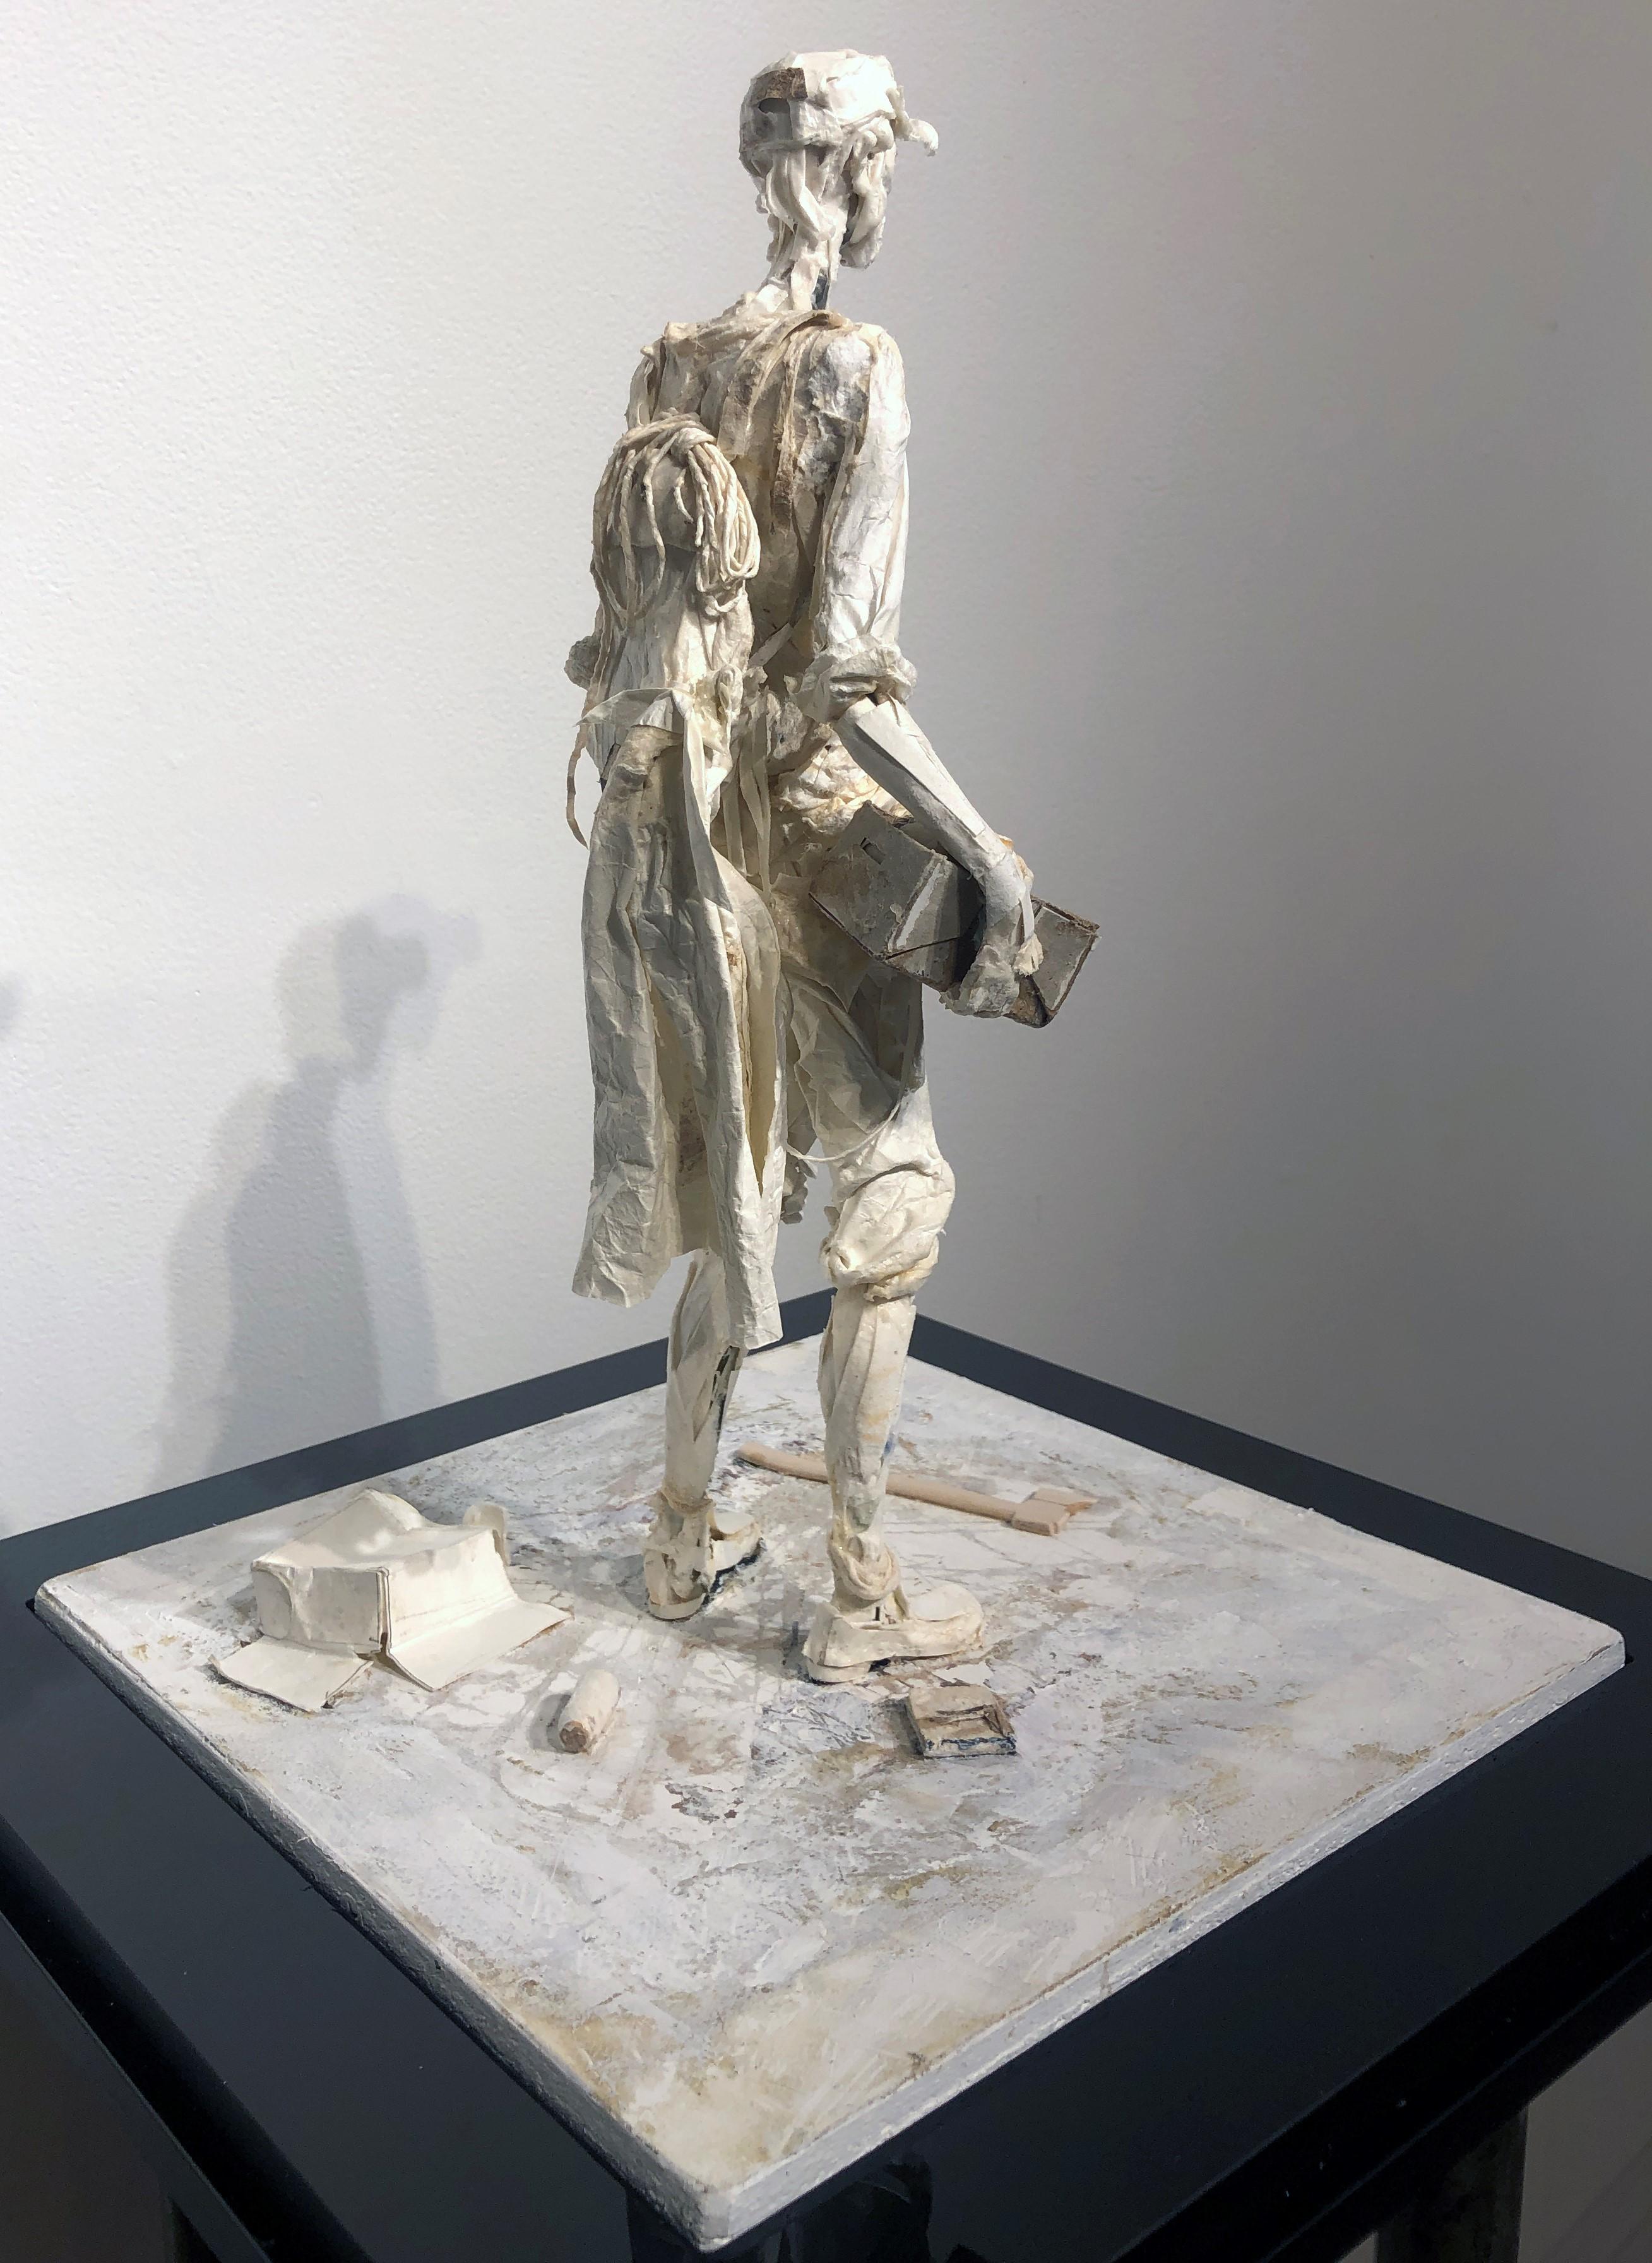 The story of David having already defeated Goliath is the subject of Ivan Markovic's sculpture of the same name.  The underdog has always been a central theme of Markovic's work. His subjects are often the forgotten and down-trodden of society.  The